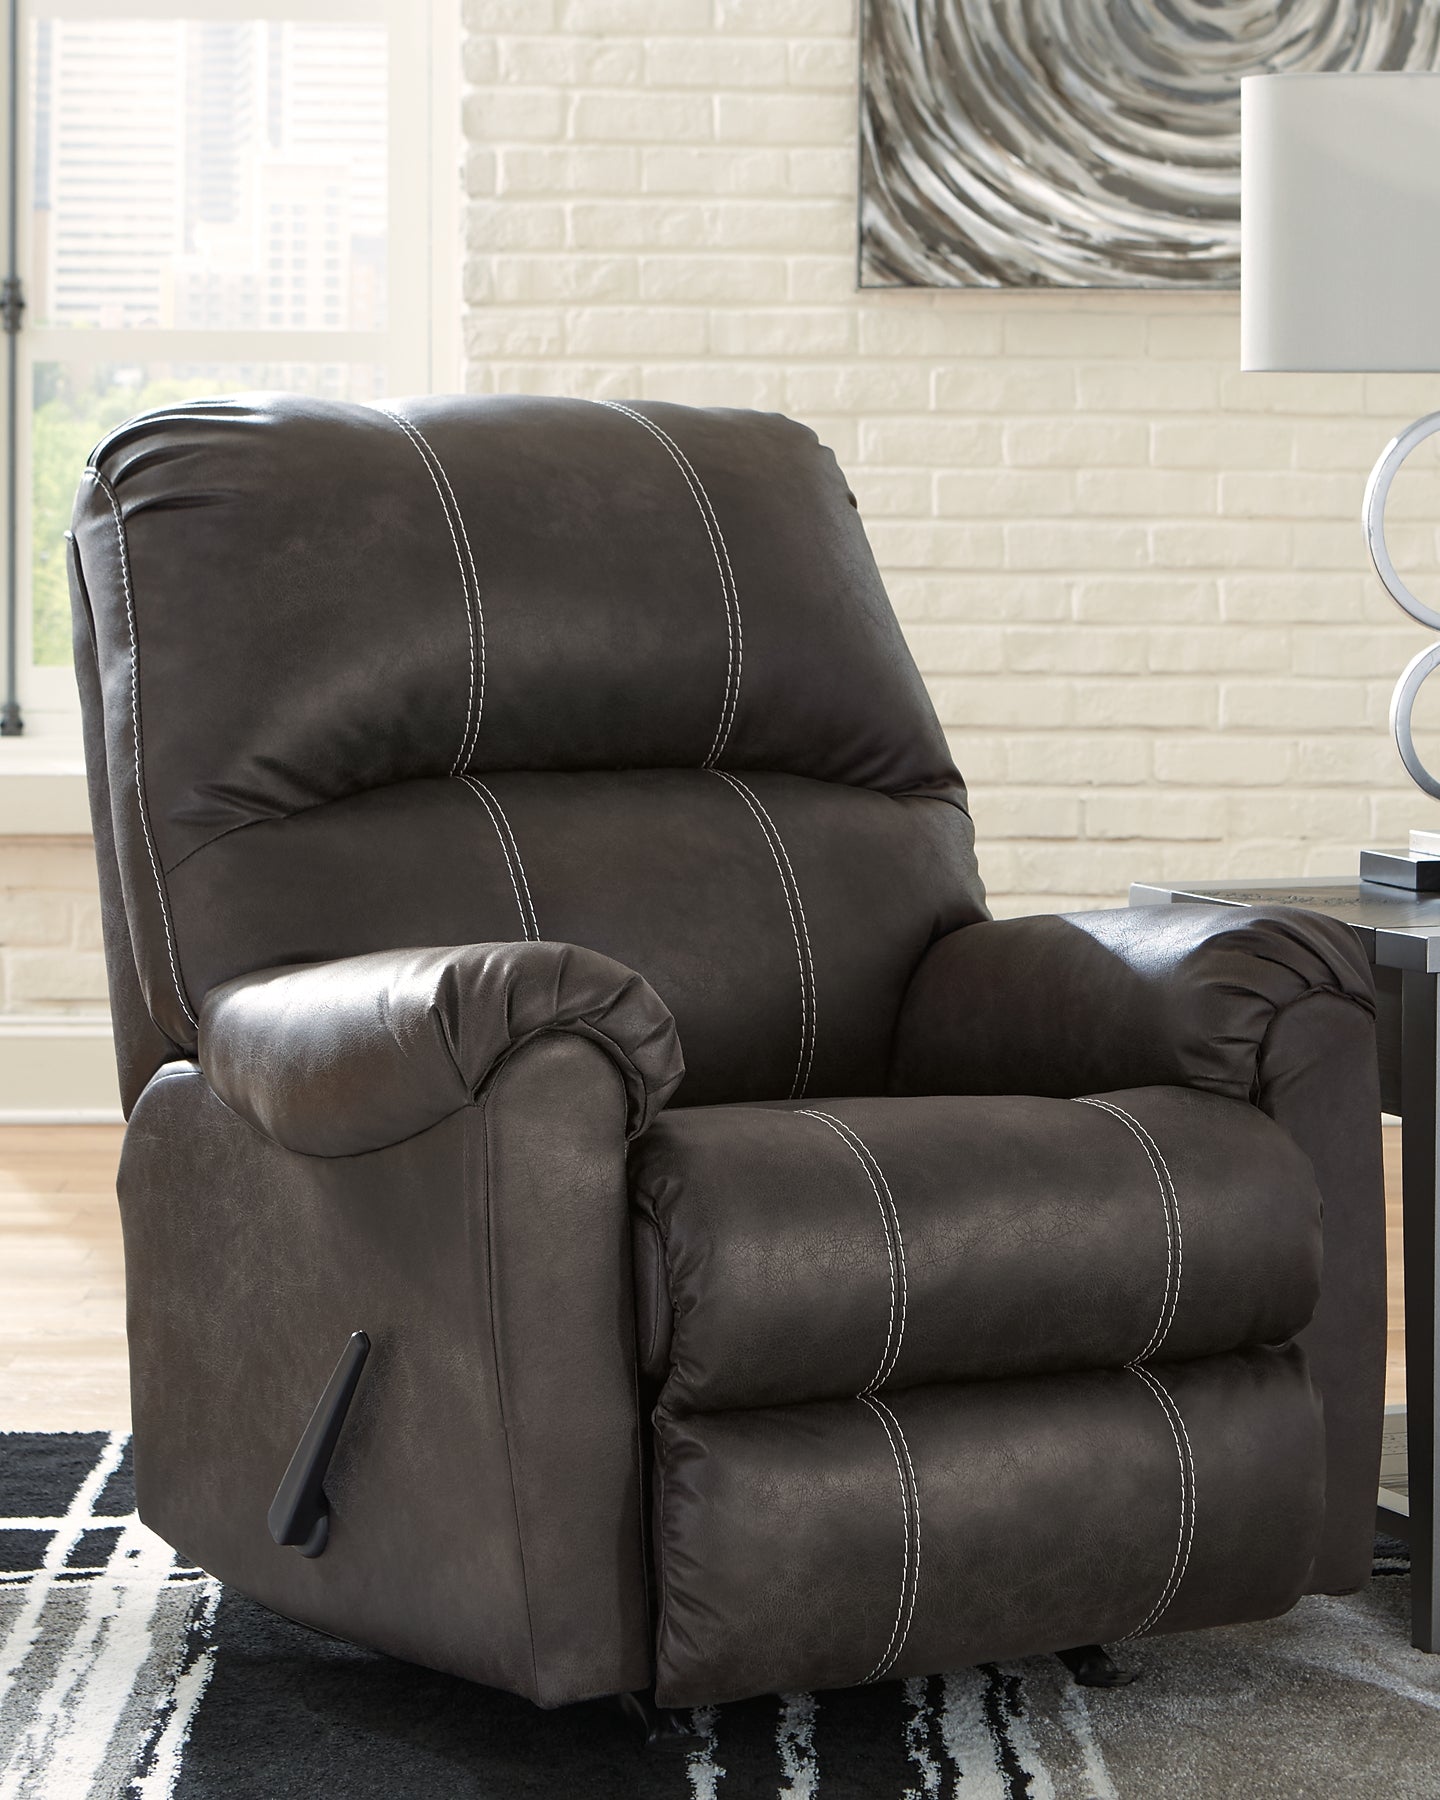 Kincord Rocker Recliner Rent Wise Rent To Own Jacksonville, Florida